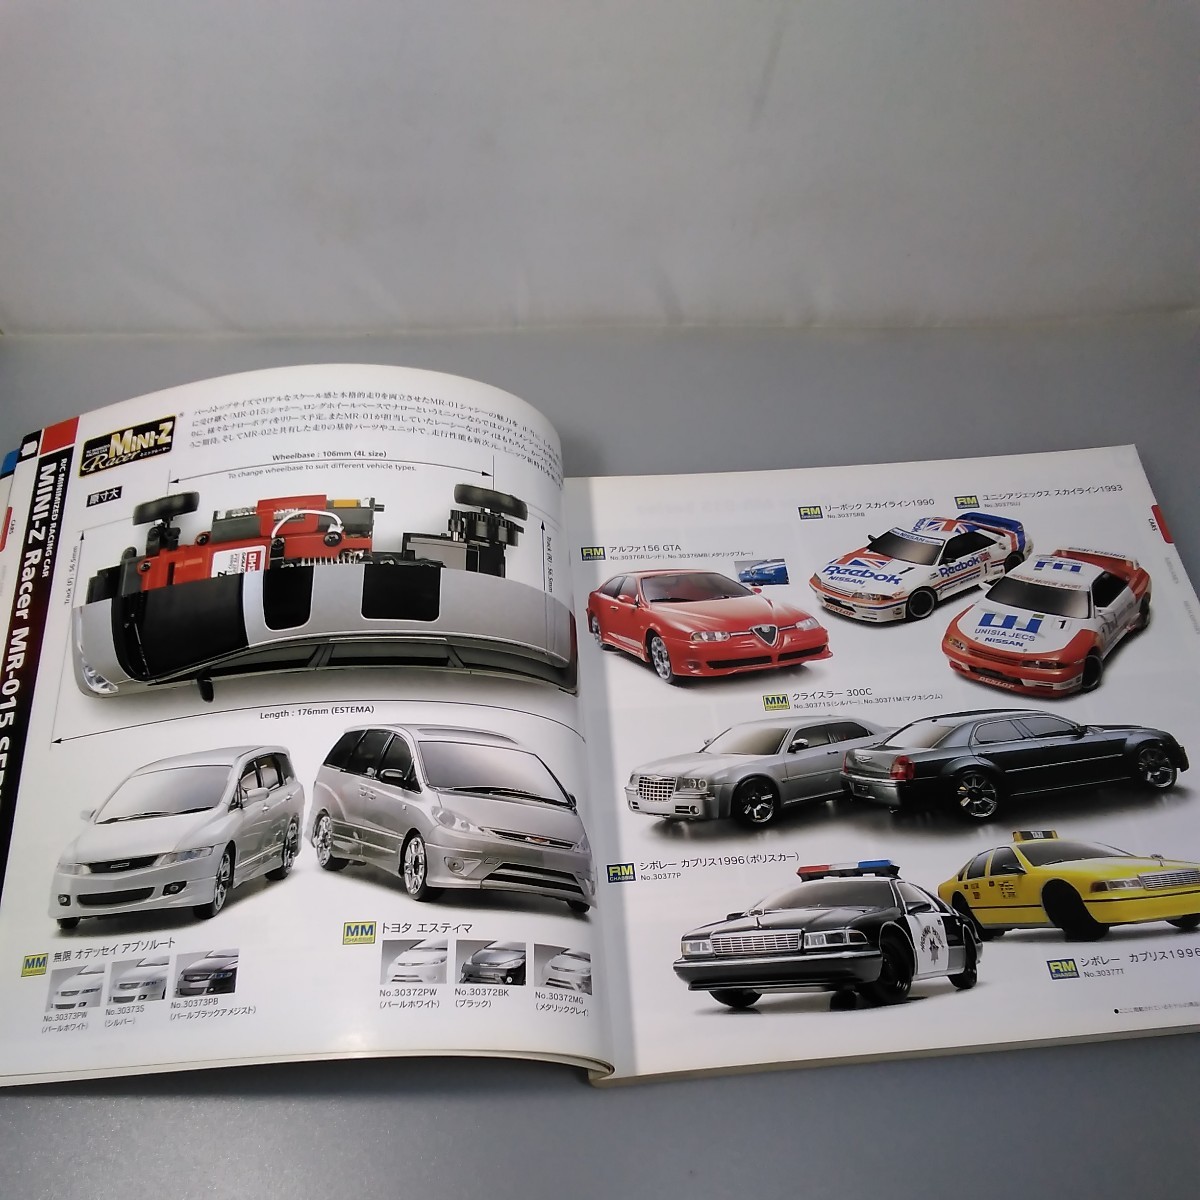  that time thing *KYOSHO*\'05 CATALOG AND HANDBOOK* Kyosho radio-controller catalog 2005 year *THE FINEST RADIO CONTROLLED MODELS* free shipping * rare * immediately shipping 